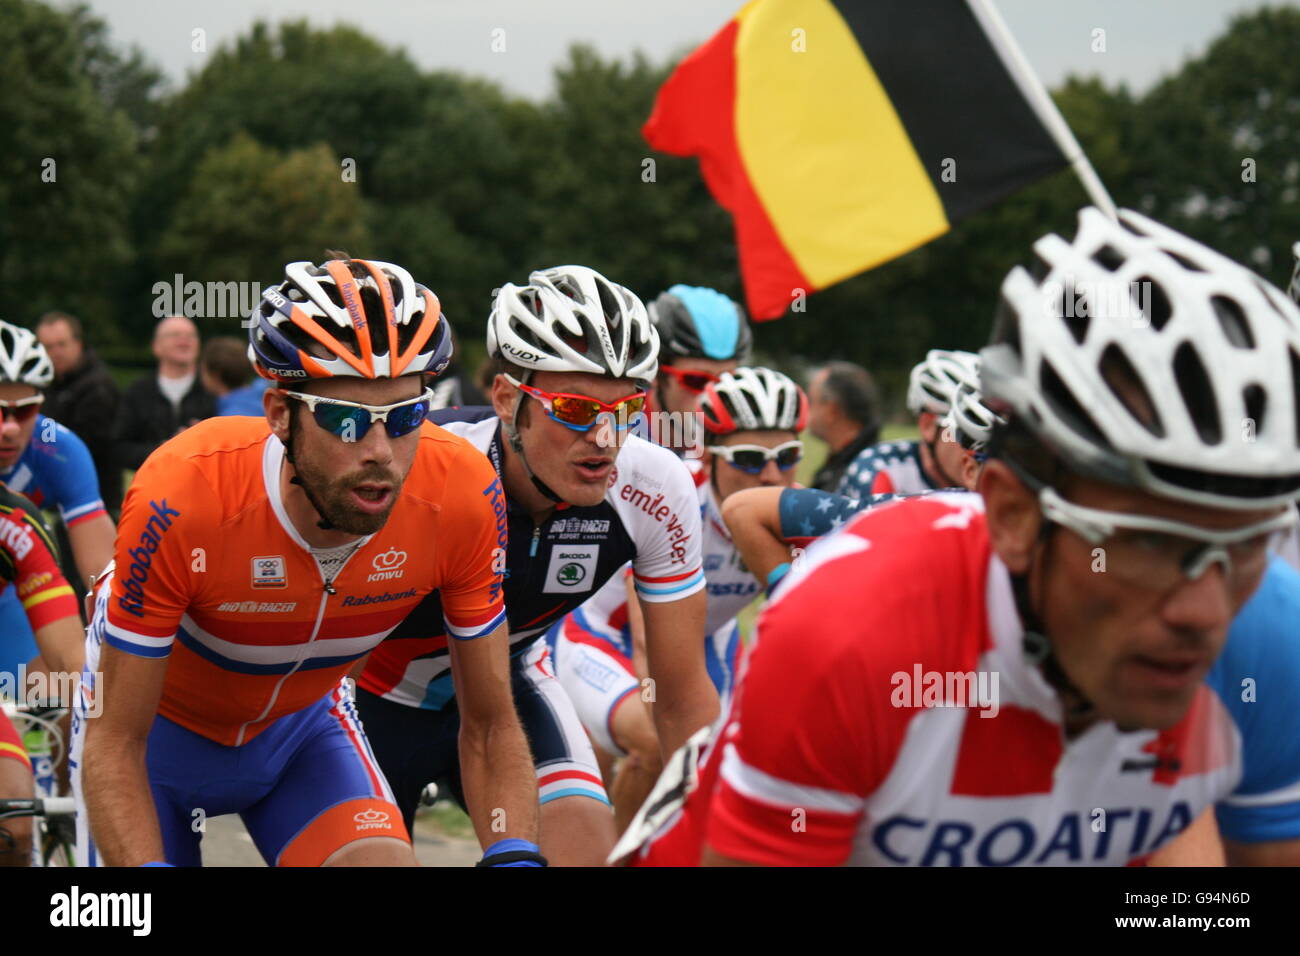 VALKENBURG, NETHERLANDS - SEPTEMBER 29  Cyclists during the cycling world championship Stock Photo